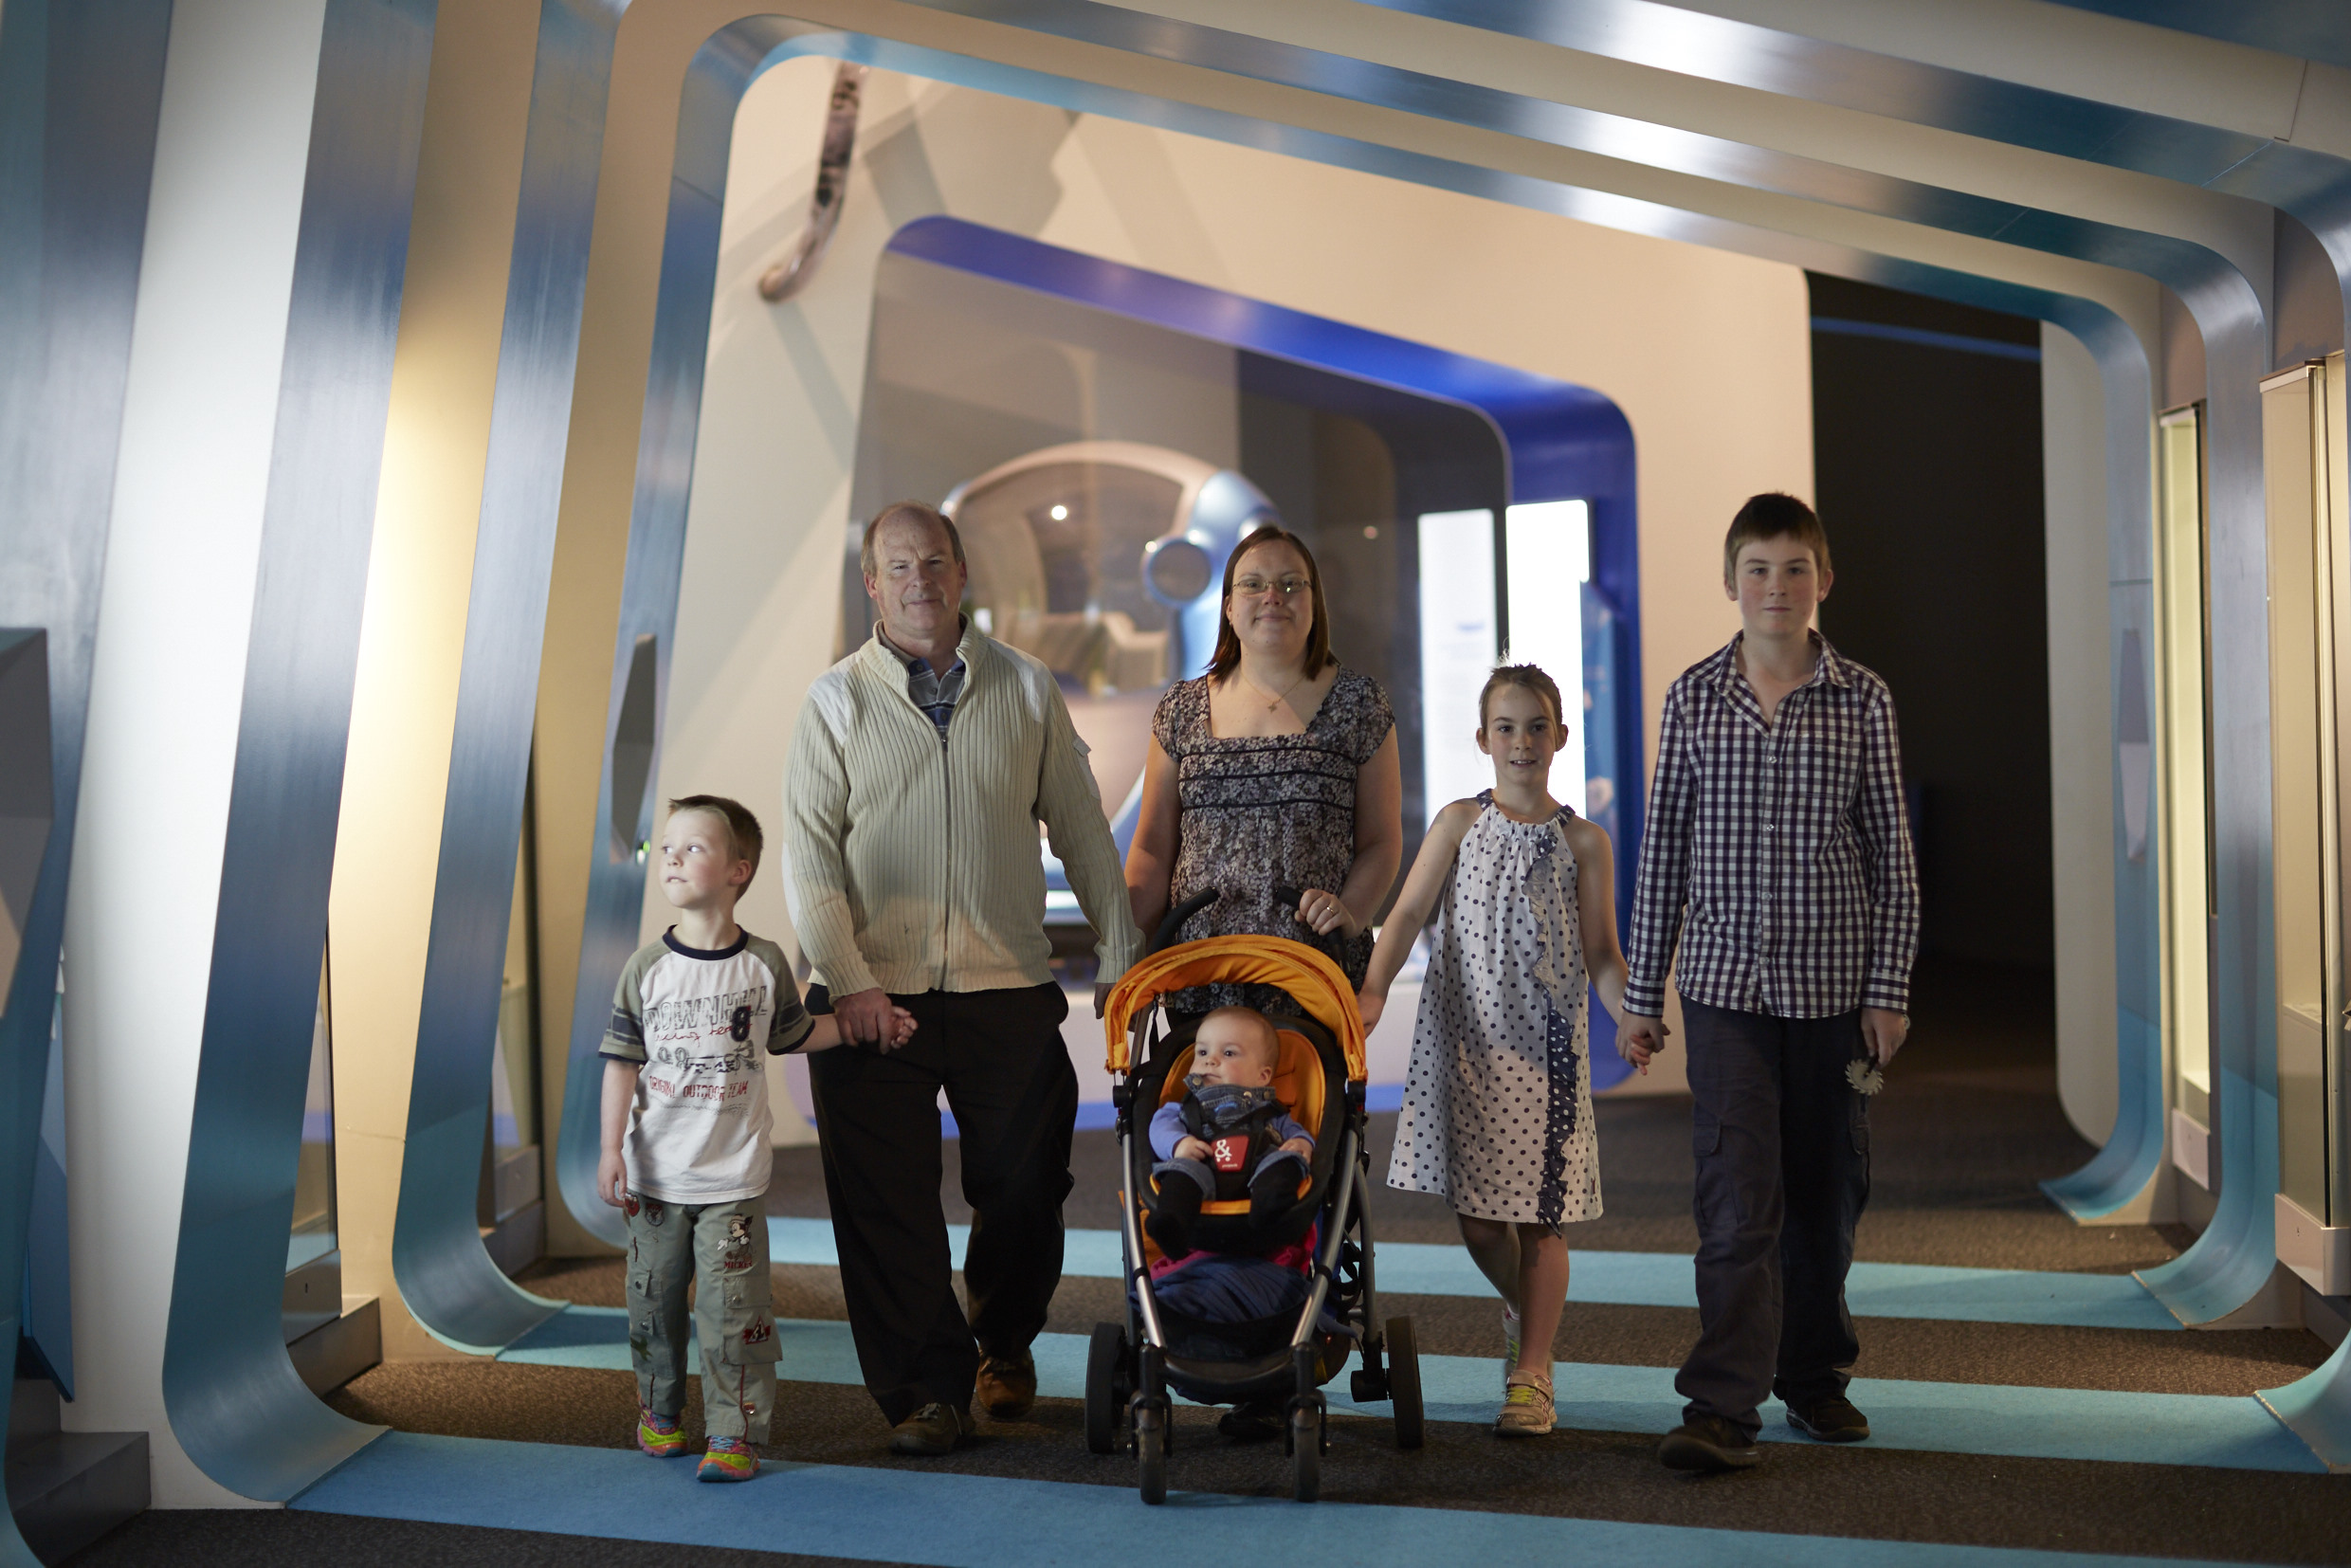 Sensory-Friendly Evening: Out of This World - Niantic Children's Museum